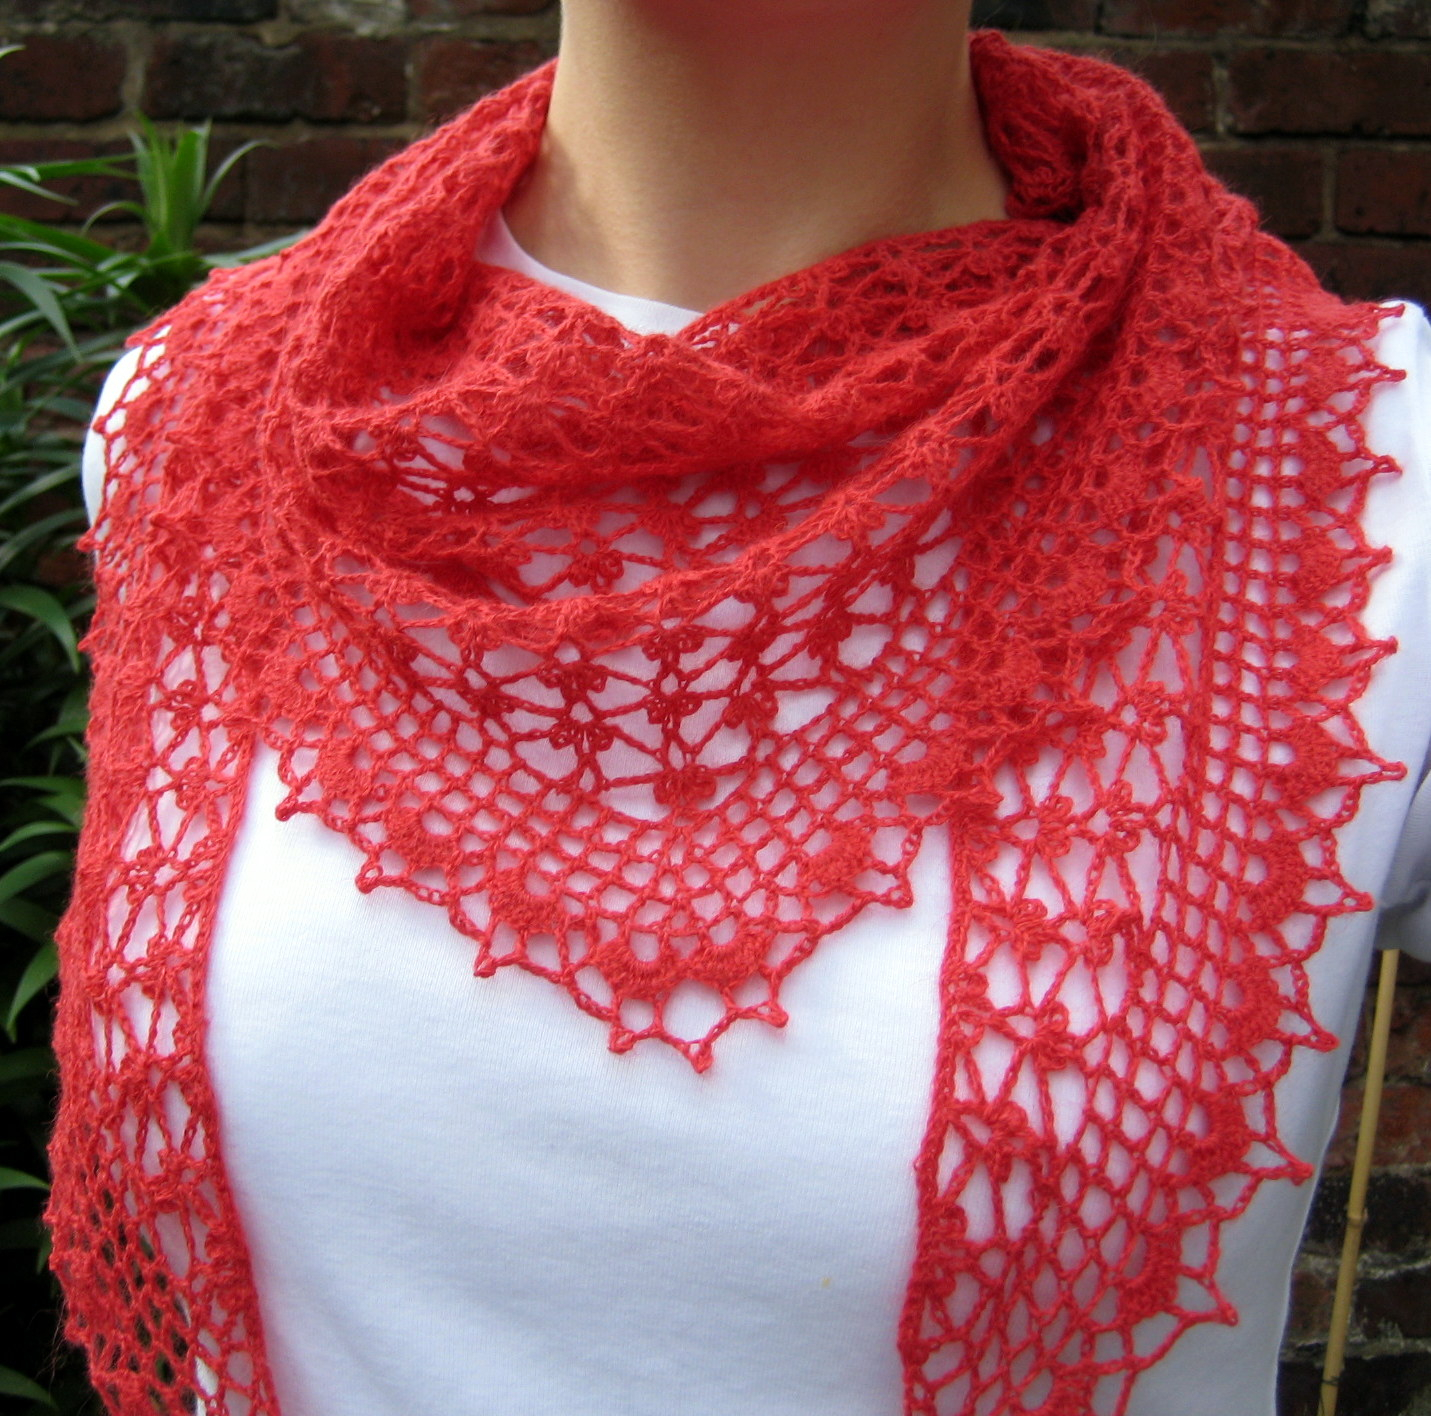 Crochet Lace Shawl Pattern Summer Sprigs Lace Scarf Make My Day Creative